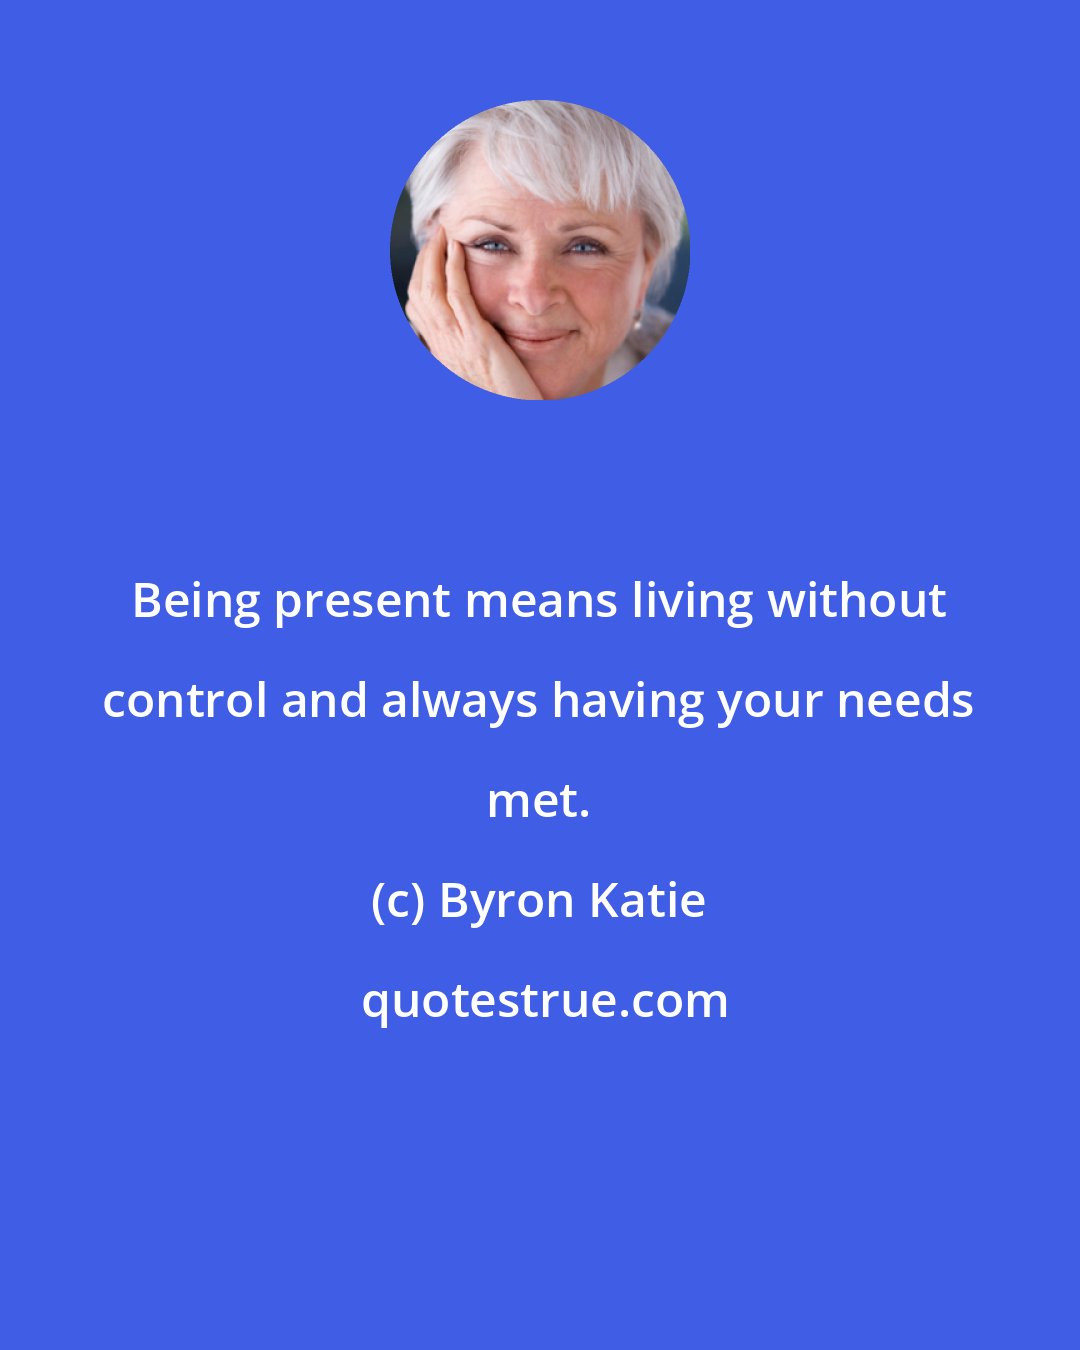 Byron Katie: Being present means living without control and always having your needs met.